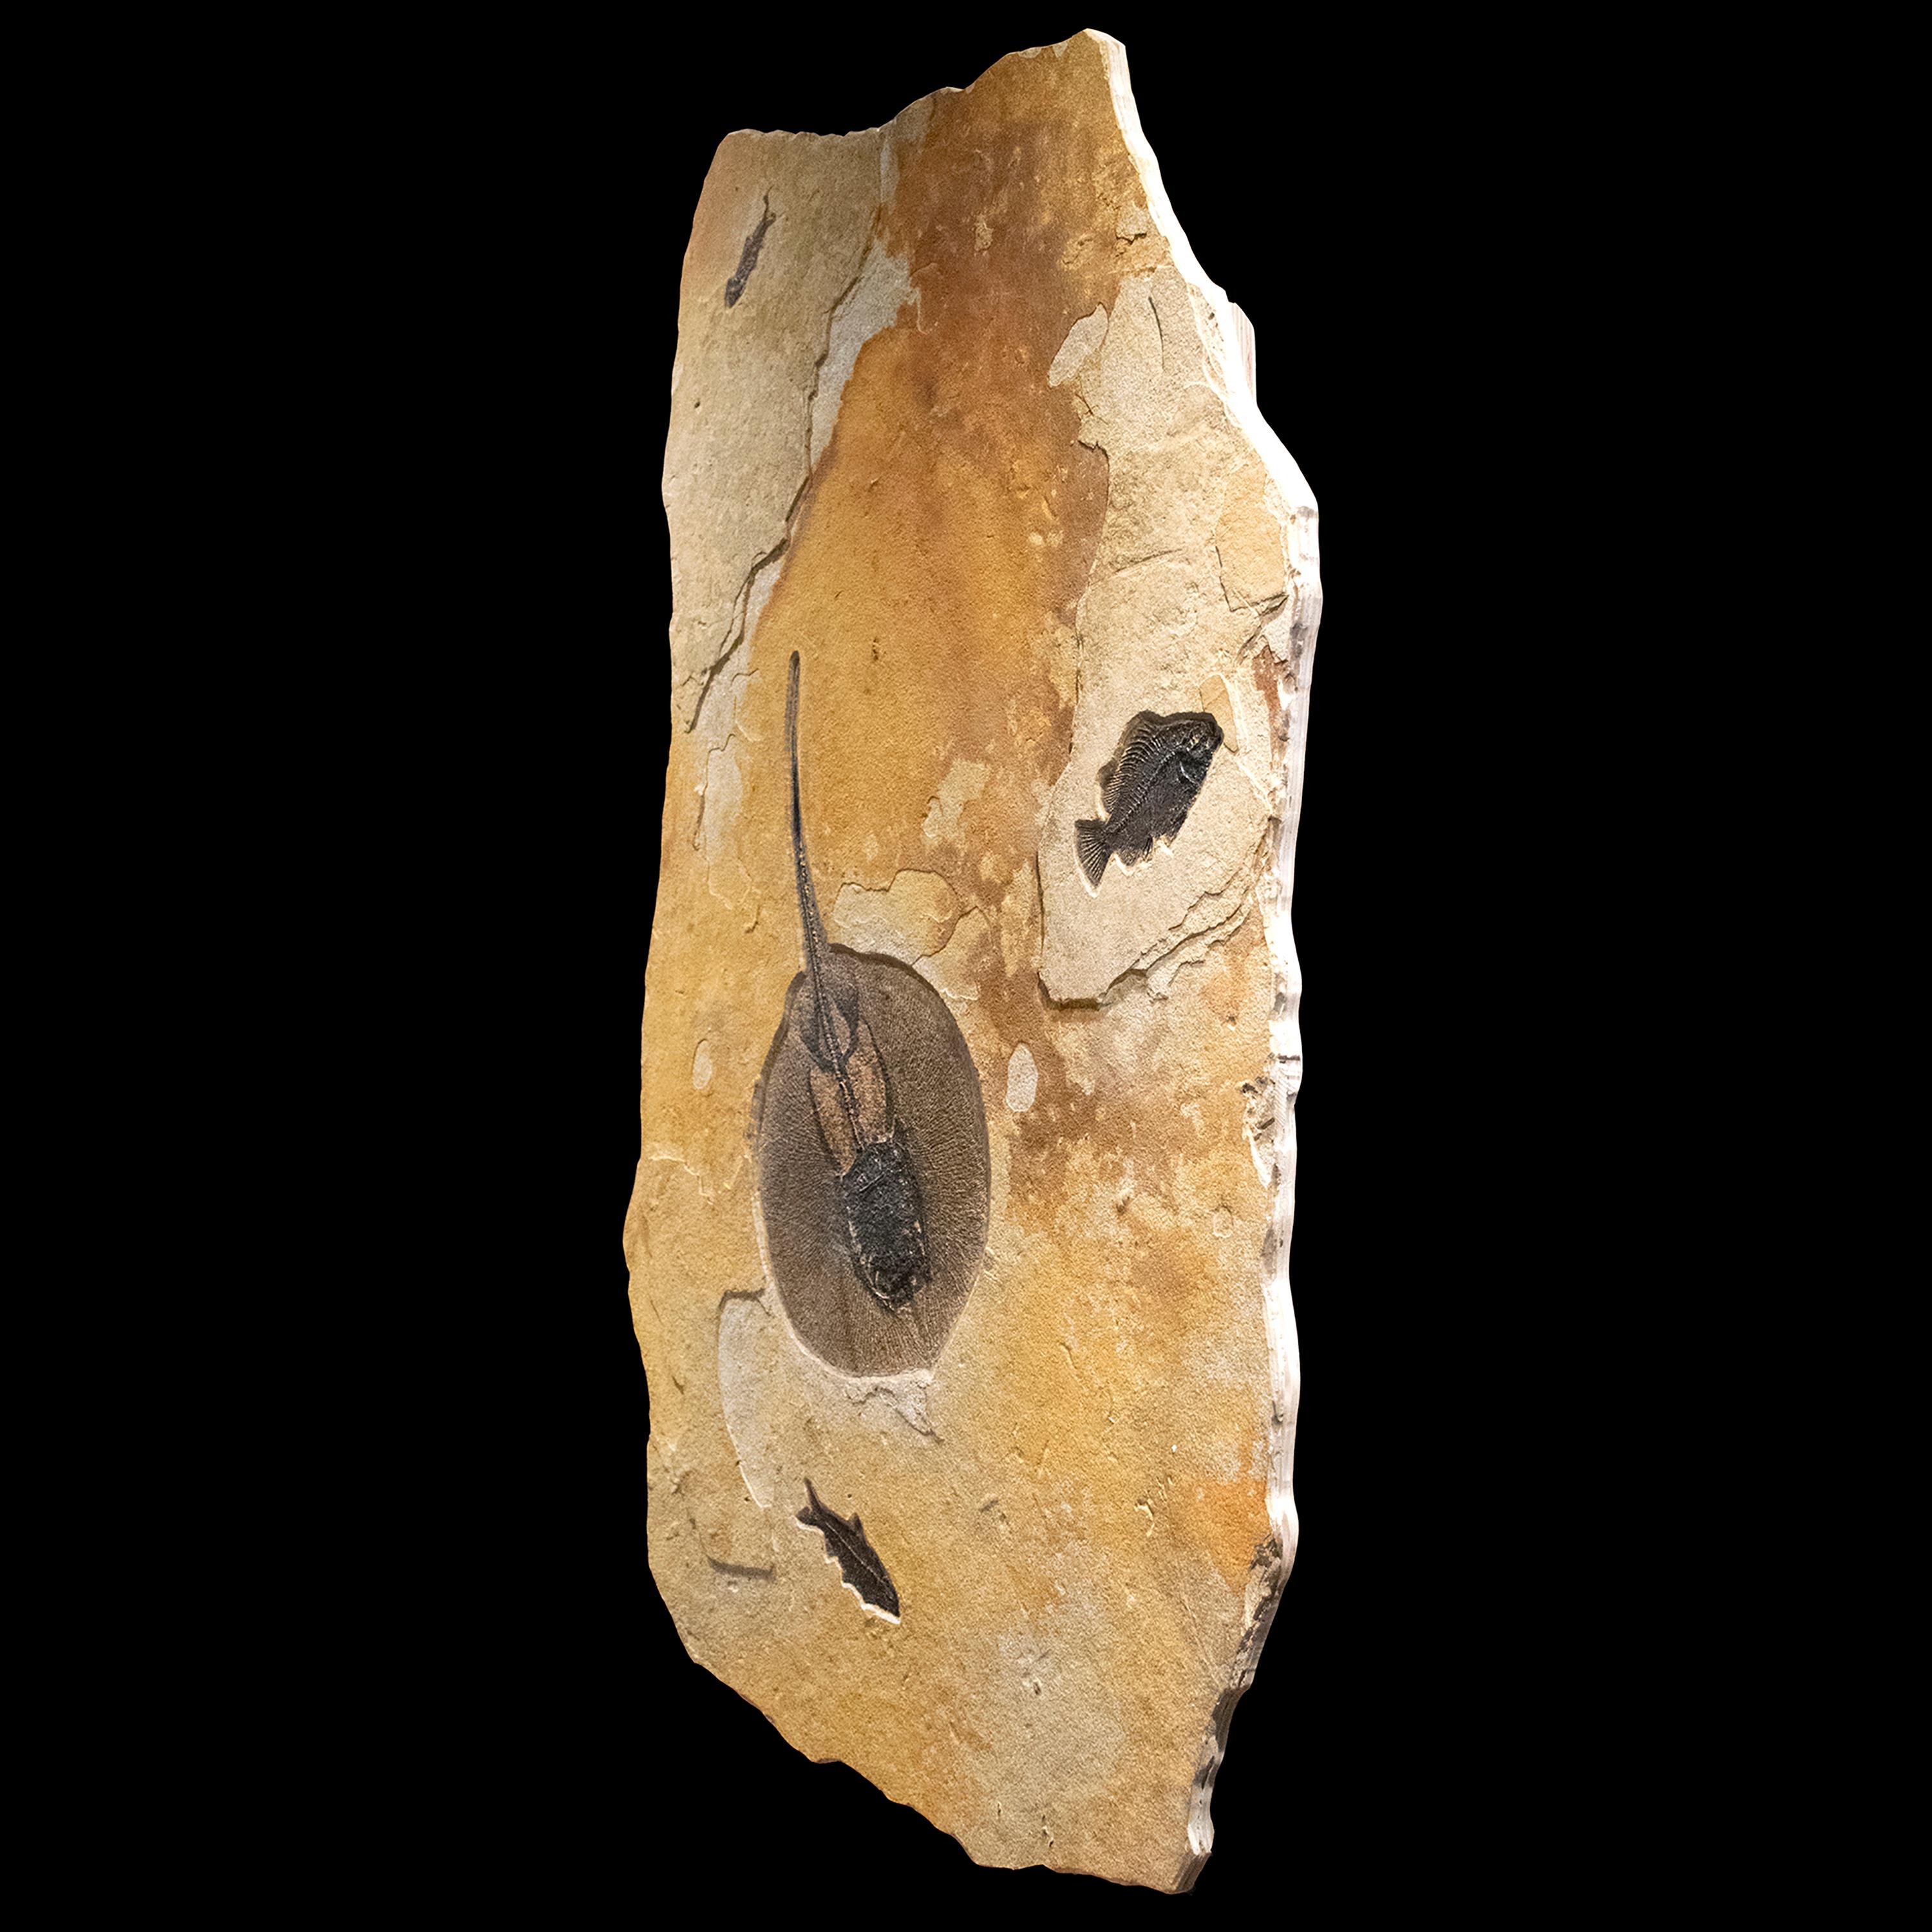 Contemporary 50 Million Year Old Eocene Era Fossil Stingray Mural in Stone, from Wyoming